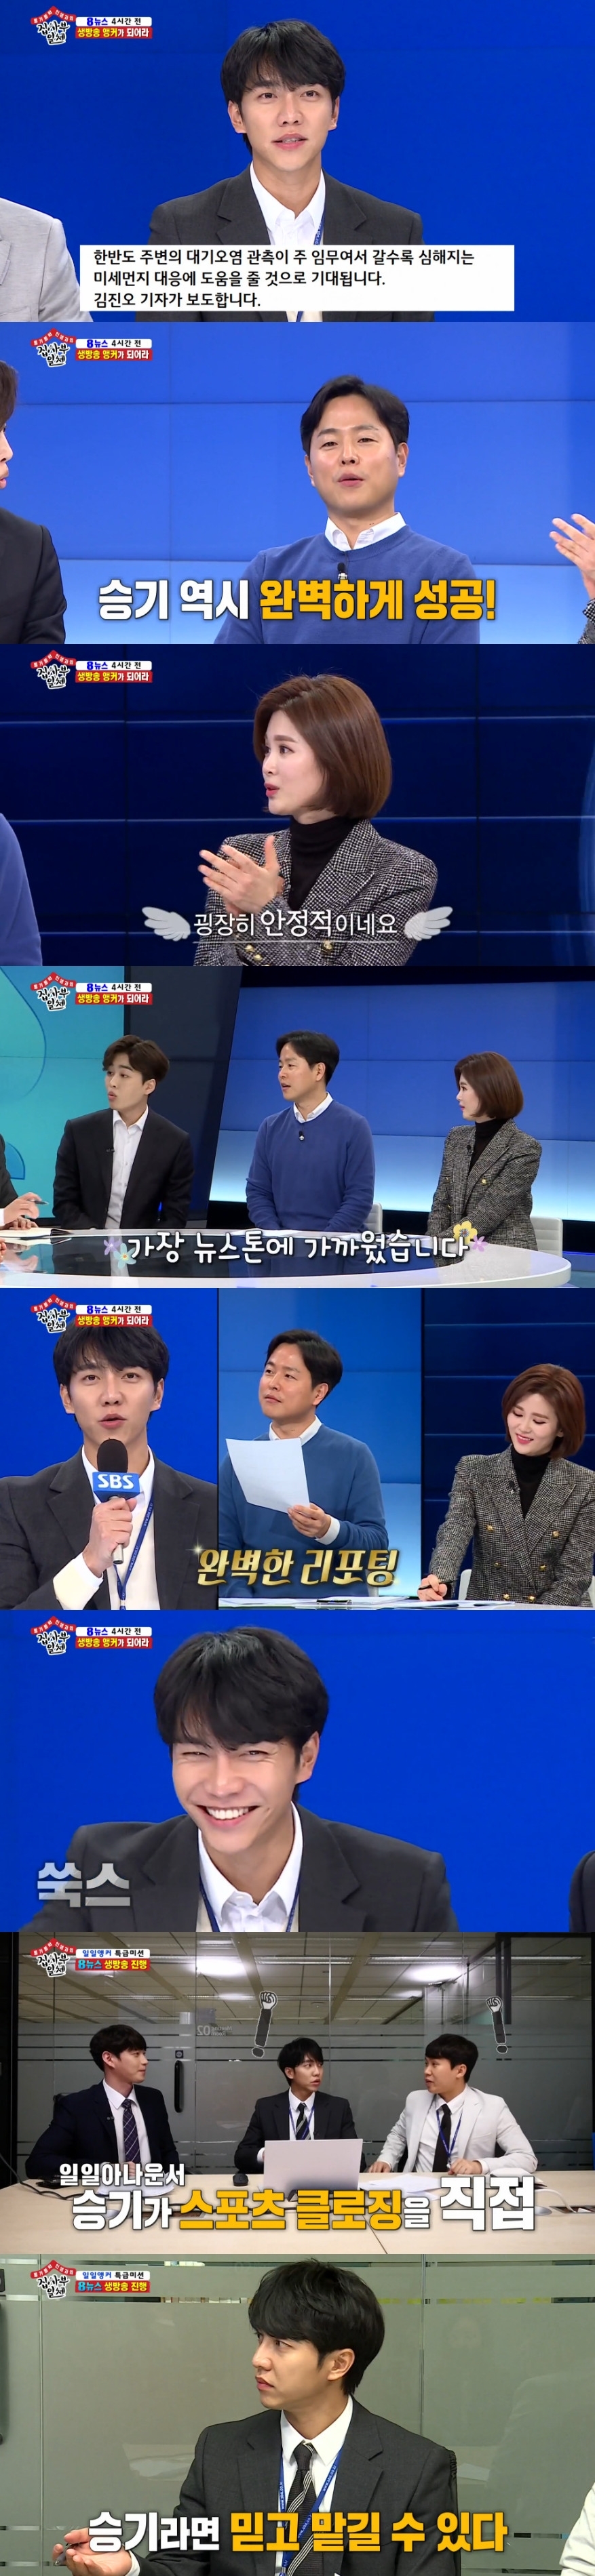 Singer and actor Lee Seung-gi received praise from SBS 8 News Anchors for his extraordinary reporting skills.Lee Seung-gi, Yang Se-hyeong, Shin Sung-rok, daily disciples Cha Eun-woo and Kim Dong-Hyun participated in SBS It Wants to Know production on SBS All The Butlers broadcast on April 19, and SBS 8 News production and progress were revealed.The five disciples who finished the production support work safely I want to know headed to SBS press headquarters.One of the five most successful performers will be in charge of sports news in the 8 News, and the second best-received person will be on radio news broadcasts (water relays).The other two were supporting production, and one was the backup anchor.The one person who took over the sports news proceedings was Lee Seung-gi, as it is known.Lee Seung-gi appeared in the 8 News sports news broadcast on March 30 and worked with SBS Kim Yoon Sang announcer.Jo Jin-sik announcer introduced Hyun Woo Anchor as a real model of Ewha Shin Anchor, played by Jo Jung-suk in SBS drama Avatar of jealousy to say interesting things.Hyun Woo Anchor said, The drama PD asked me to teach Jo Jung-suk what to do.I was so good at acting that it made us much more prominent in what we do. There was also talk about Lee Yeo-jin, wife of the Hyo Woo Anchor, Weather Report Girl.Jo Jin-sik announcer said, In the drama, Gong Hyo-jin and Jo Jung-suk of Weather Report Girl are connected. In fact, Hyo Woo Anchor married Weather Report Girl.It became like a drama, just like a drama. Among them, the disciples who received the favorable reviews of Hyun Woo and Choi Hye-rim Anchor were Lee Seung-gi.Its very stable, said Choi Hye-rim Anchor, to Lee Seung-gis reporting, which Hyun Woo commented was close to the most newstones.Jo Jin-sik announcer expressed sympathy that it is the first time, but this is really good.A mission was also given to do reporting by memorized actual sports news scripts; five disciples were given scripts at random.Lee Seung-gi has presented the perfect reporting, even though it was given just 30 seconds of memorization time.Lee Seung-gi, who had a chance to become a daily announcer, also took on sports news closing instead of Kim Yoon Sang announcer.Kim Yoon Sang announcer said, I am right to do it, but after the team meeting, Lee Seung-gi decided that I could trust it.Its all Lee Seung-gi does until the finish, he said.Lee Seung-gi also expressed extreme pressure ahead of the live broadcast, but after repeated practice, he finished the live broadcast without major mistakes.hwang hye-jin